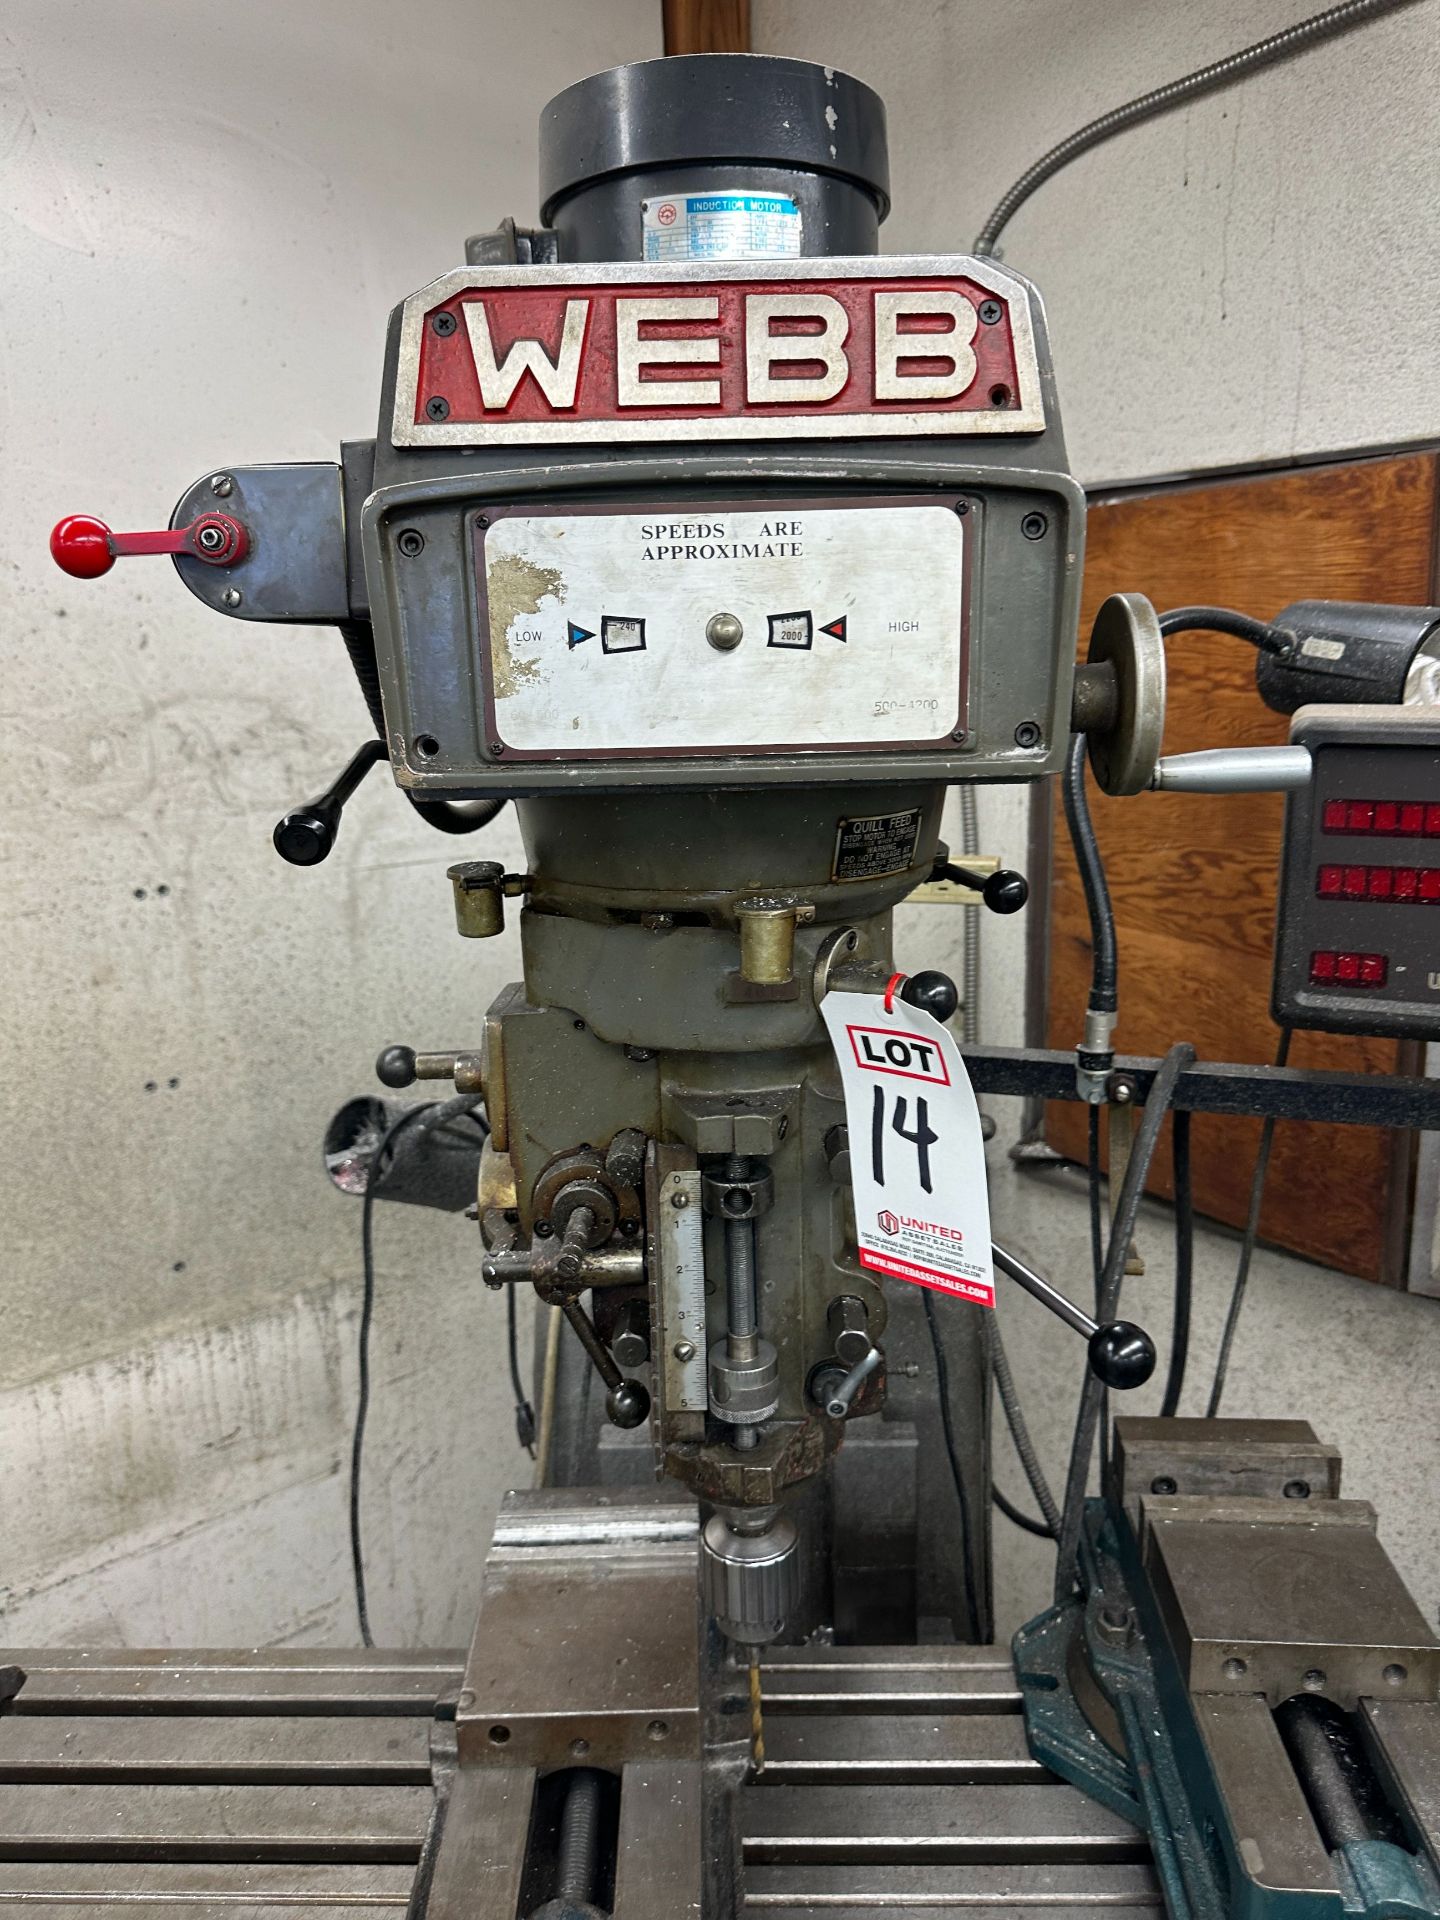 1987 WEBB CHAMP 4/H VERTICAL MILL, ANILAM WIZARD XY DRO, 10" X 50" TABLE, MFG NO. 4614, NOTE: (2) - Image 2 of 7